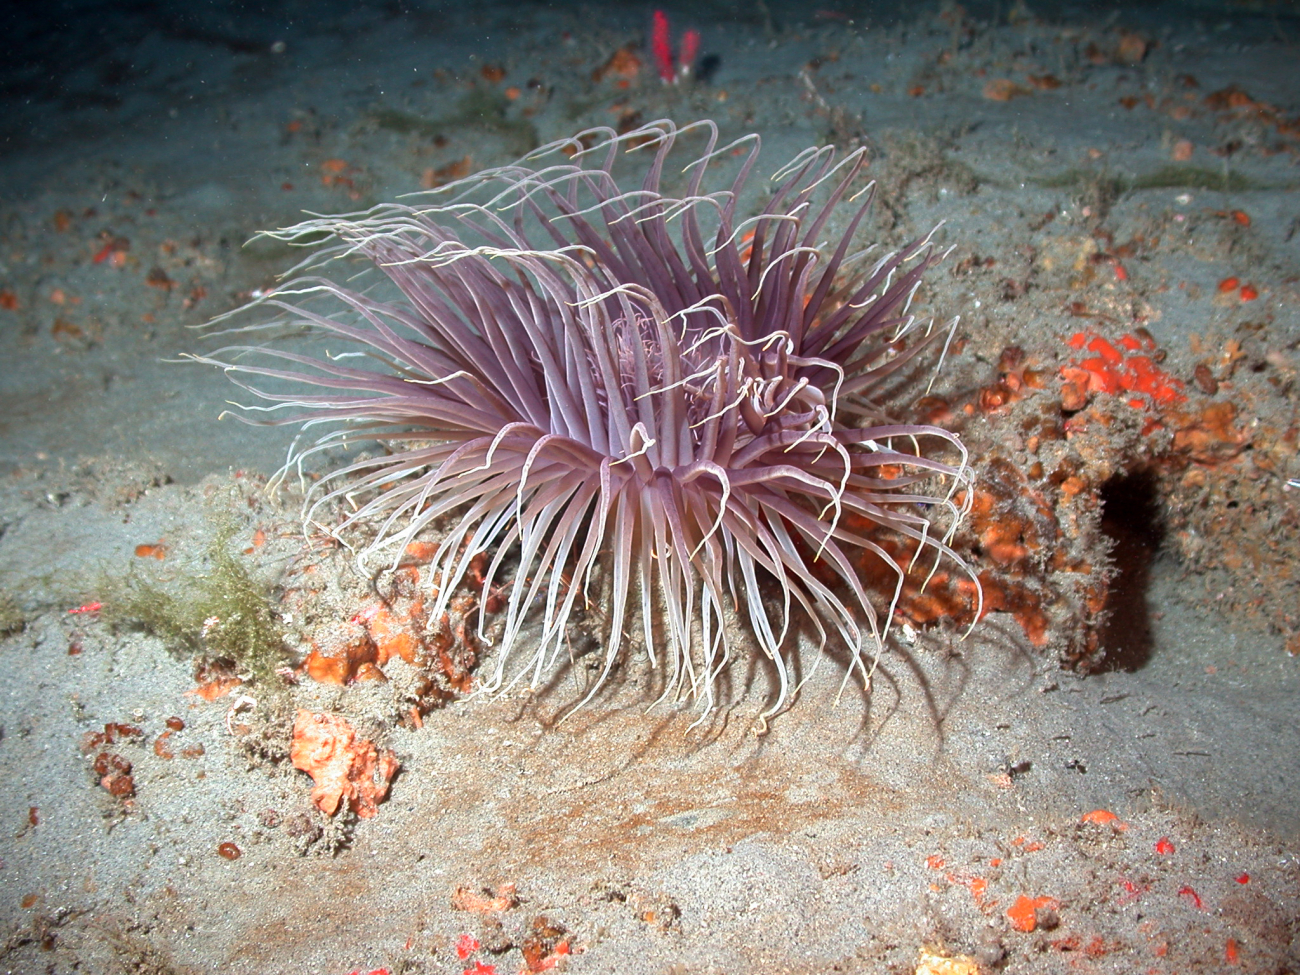 A large burrowing cerianthid anemone